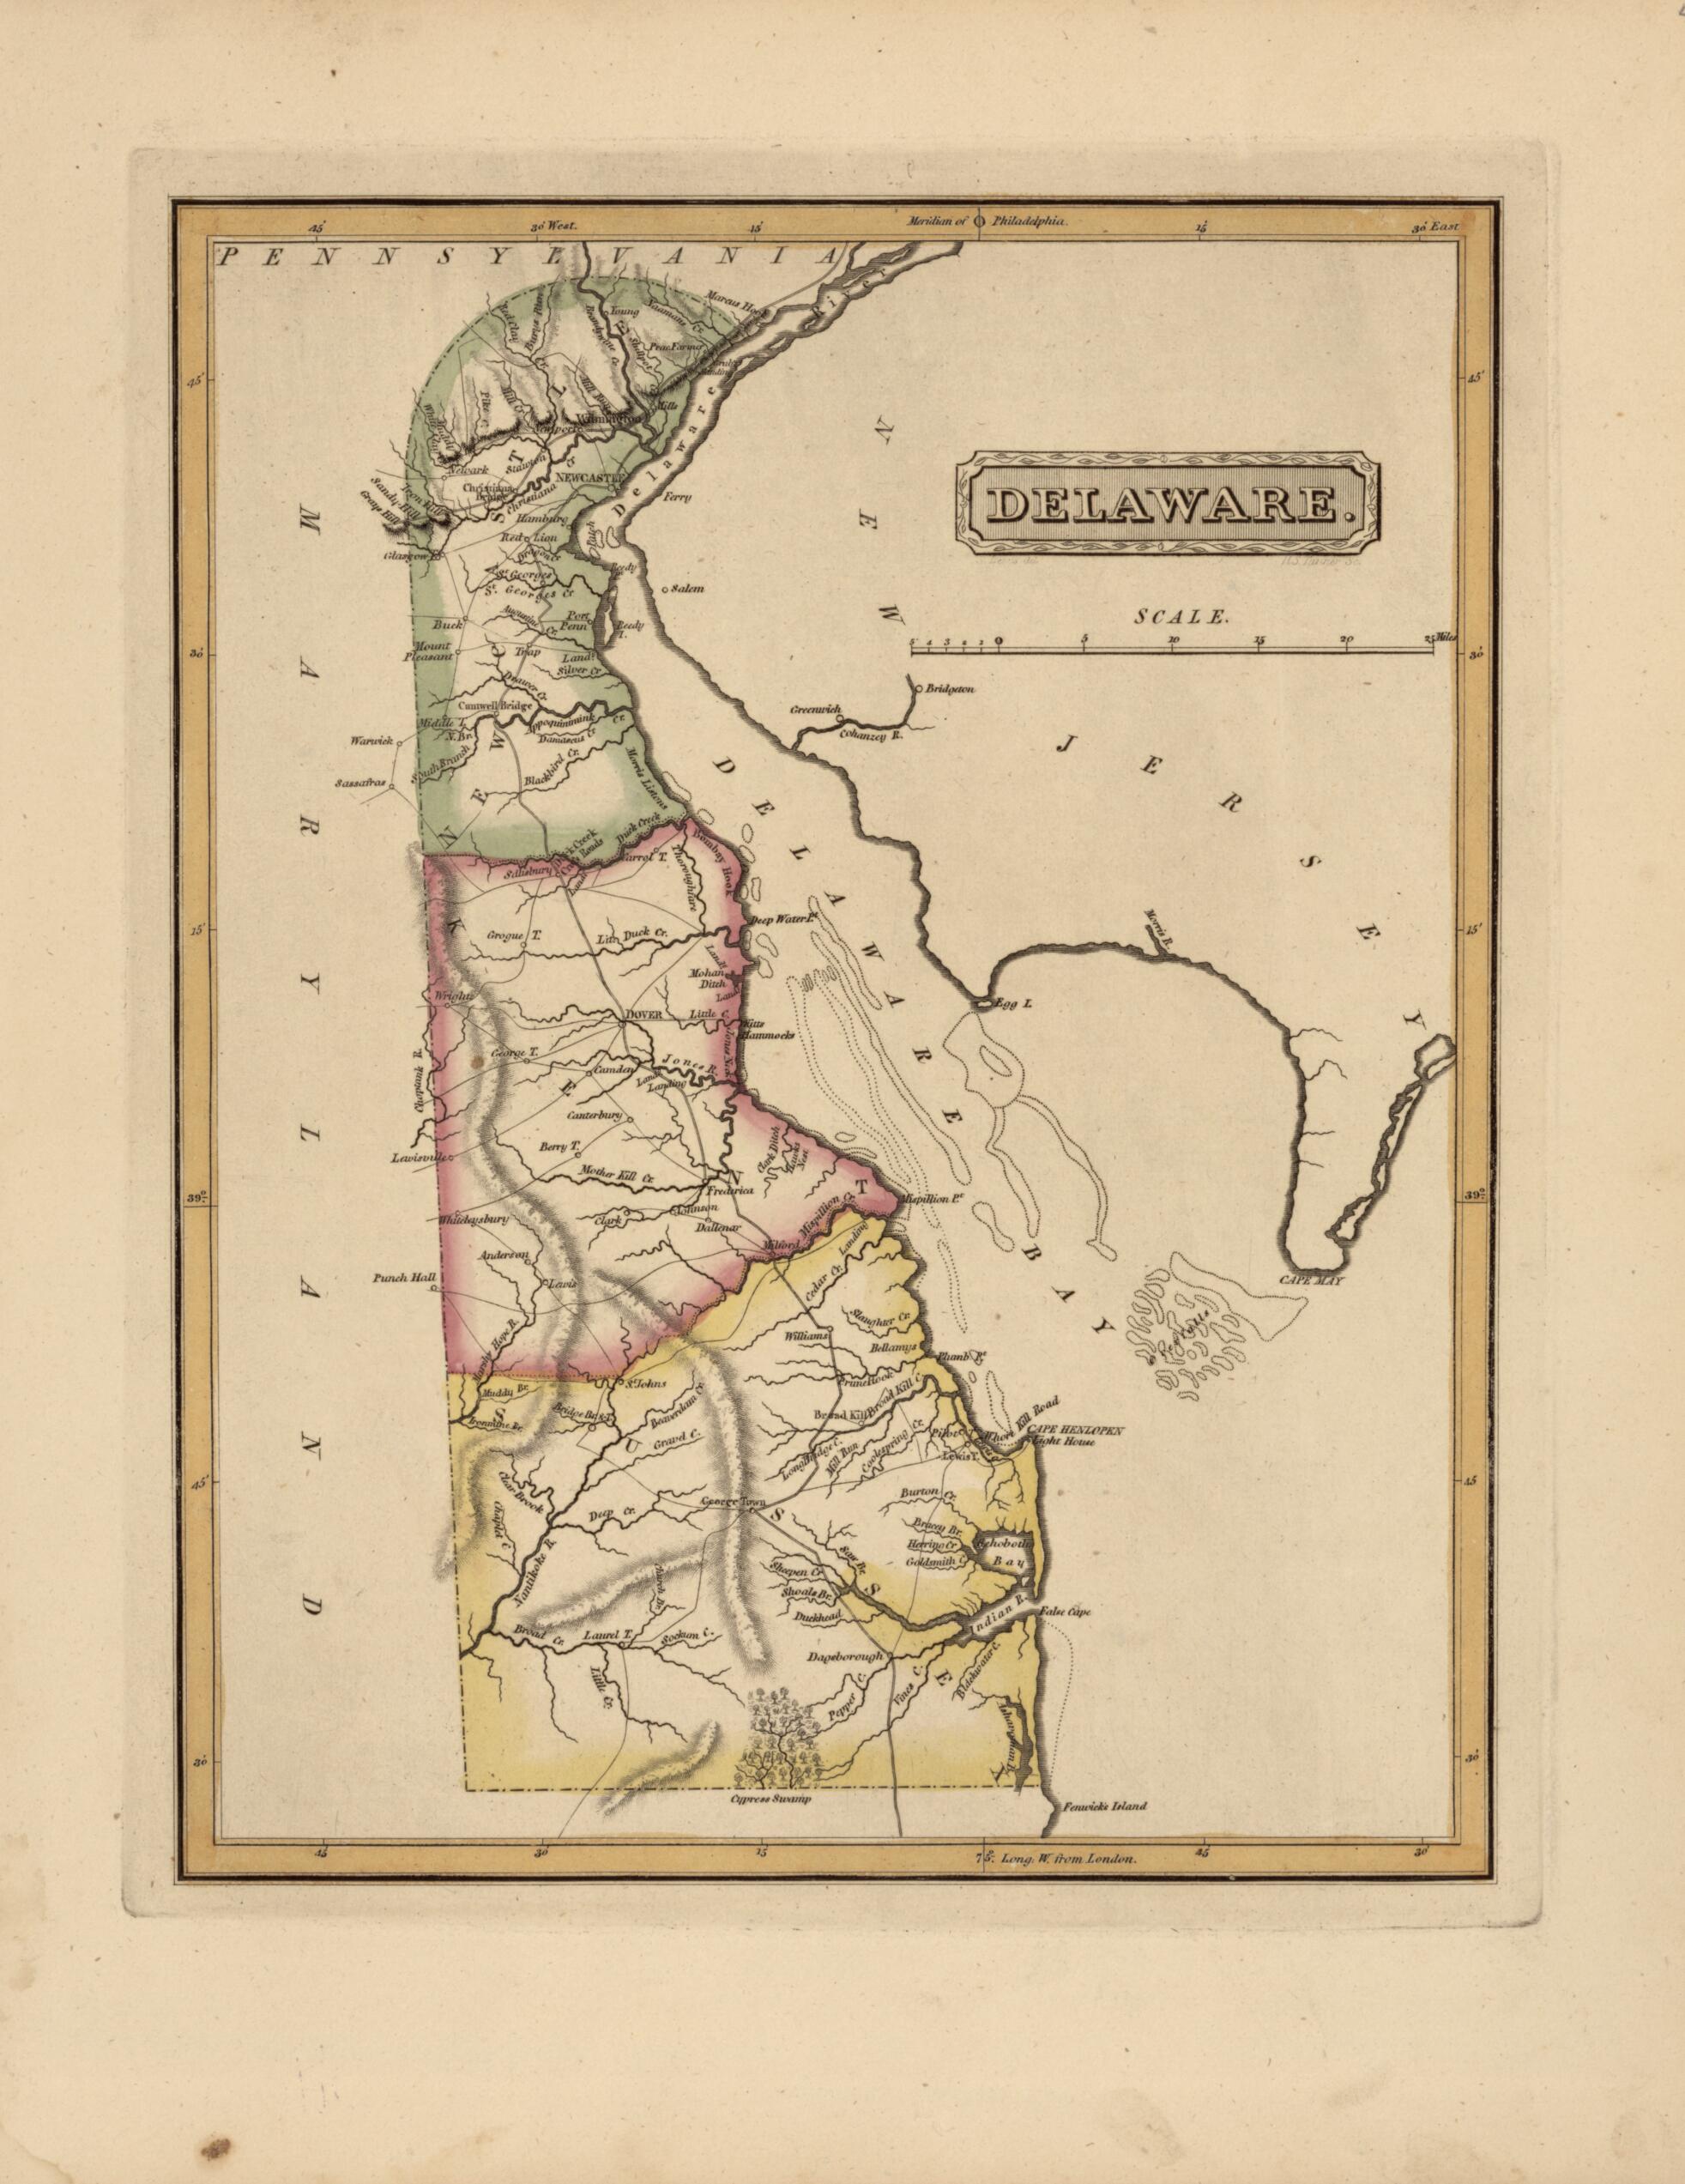 This old map of Delaware from a New and Elegant General Atlas, Containing Maps of Each of the United States. from 1817 was created by Henry Schenck Tanner in 1817